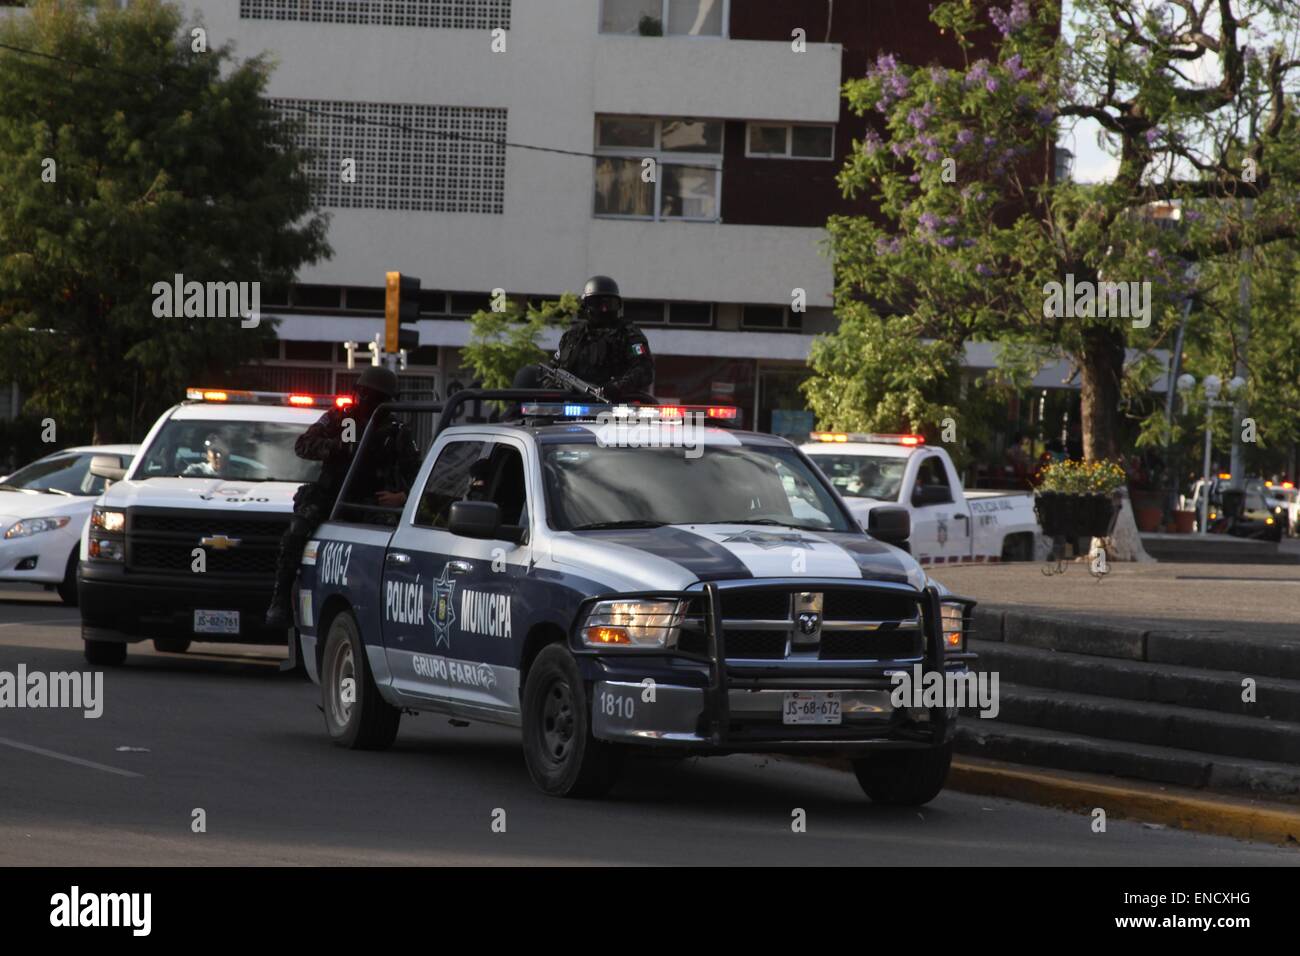 Jalisco, Mexico. 2nd May, 2015. Policemen patrol a street after the violent acts on Friday in Guadalajara, Jalisco state, Mexico, on May 2, 2015. According to local press, At least seven people were killed and 19 others injured during an outbreak of violence early Friday in parts of Mexico's western state of Jalisco, where local government launched an operation against a drug cartel. © Str/Xinhua/Alamy Live News Stock Photo